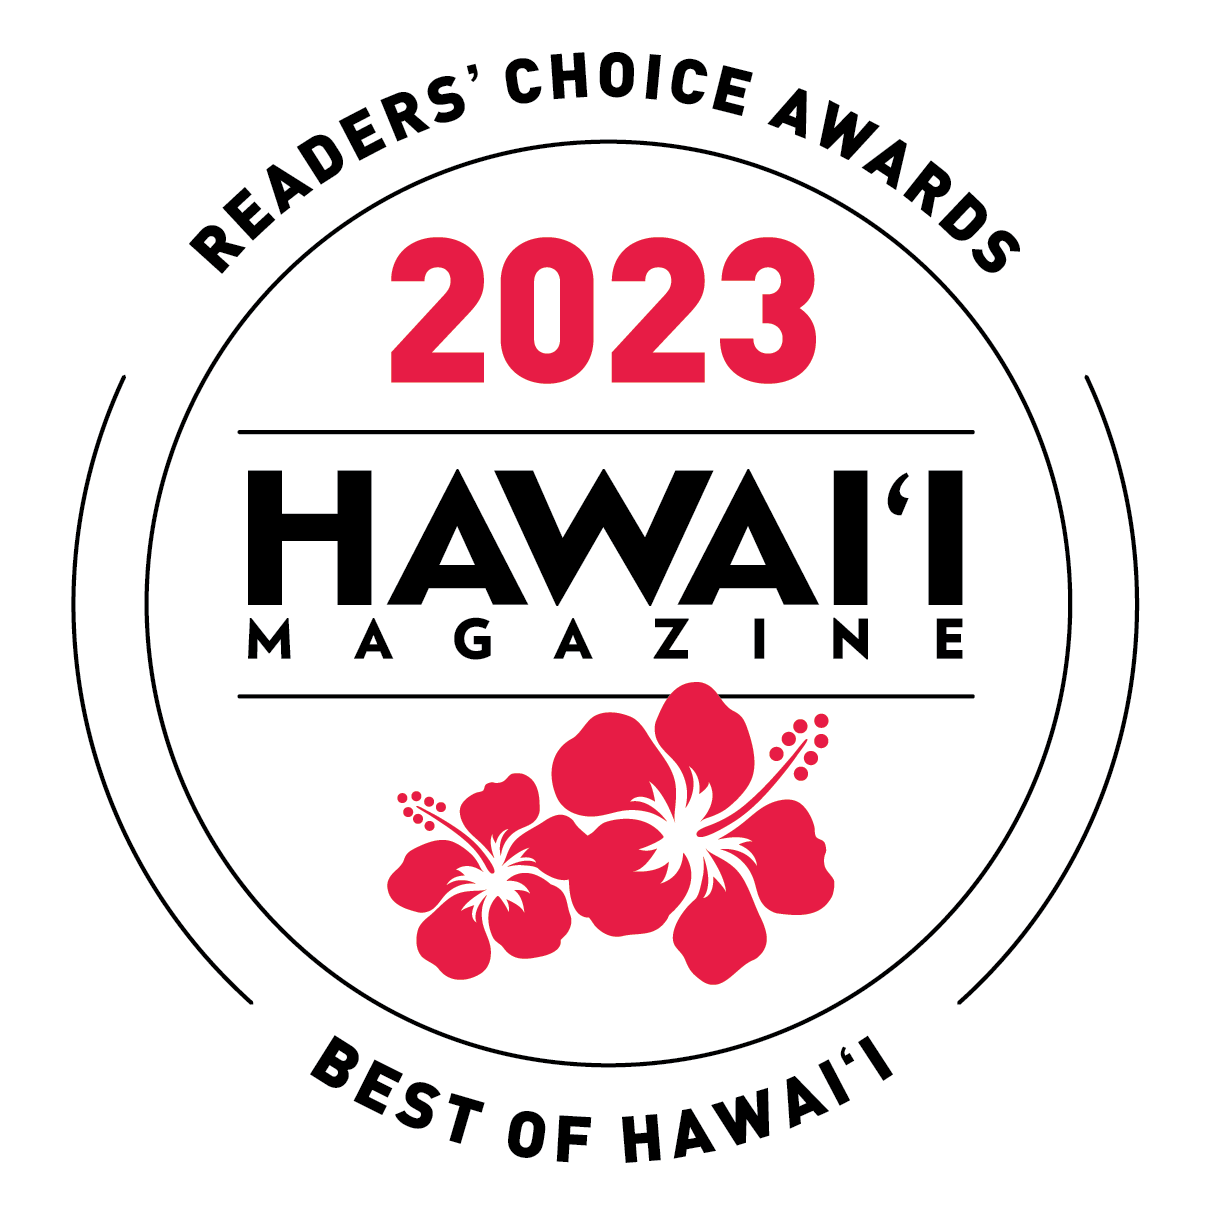 Aston Kaanapali Shores has earned the Best Budget Hotel from Hawaii Magazine's Readers' Choice Award for the year 2023